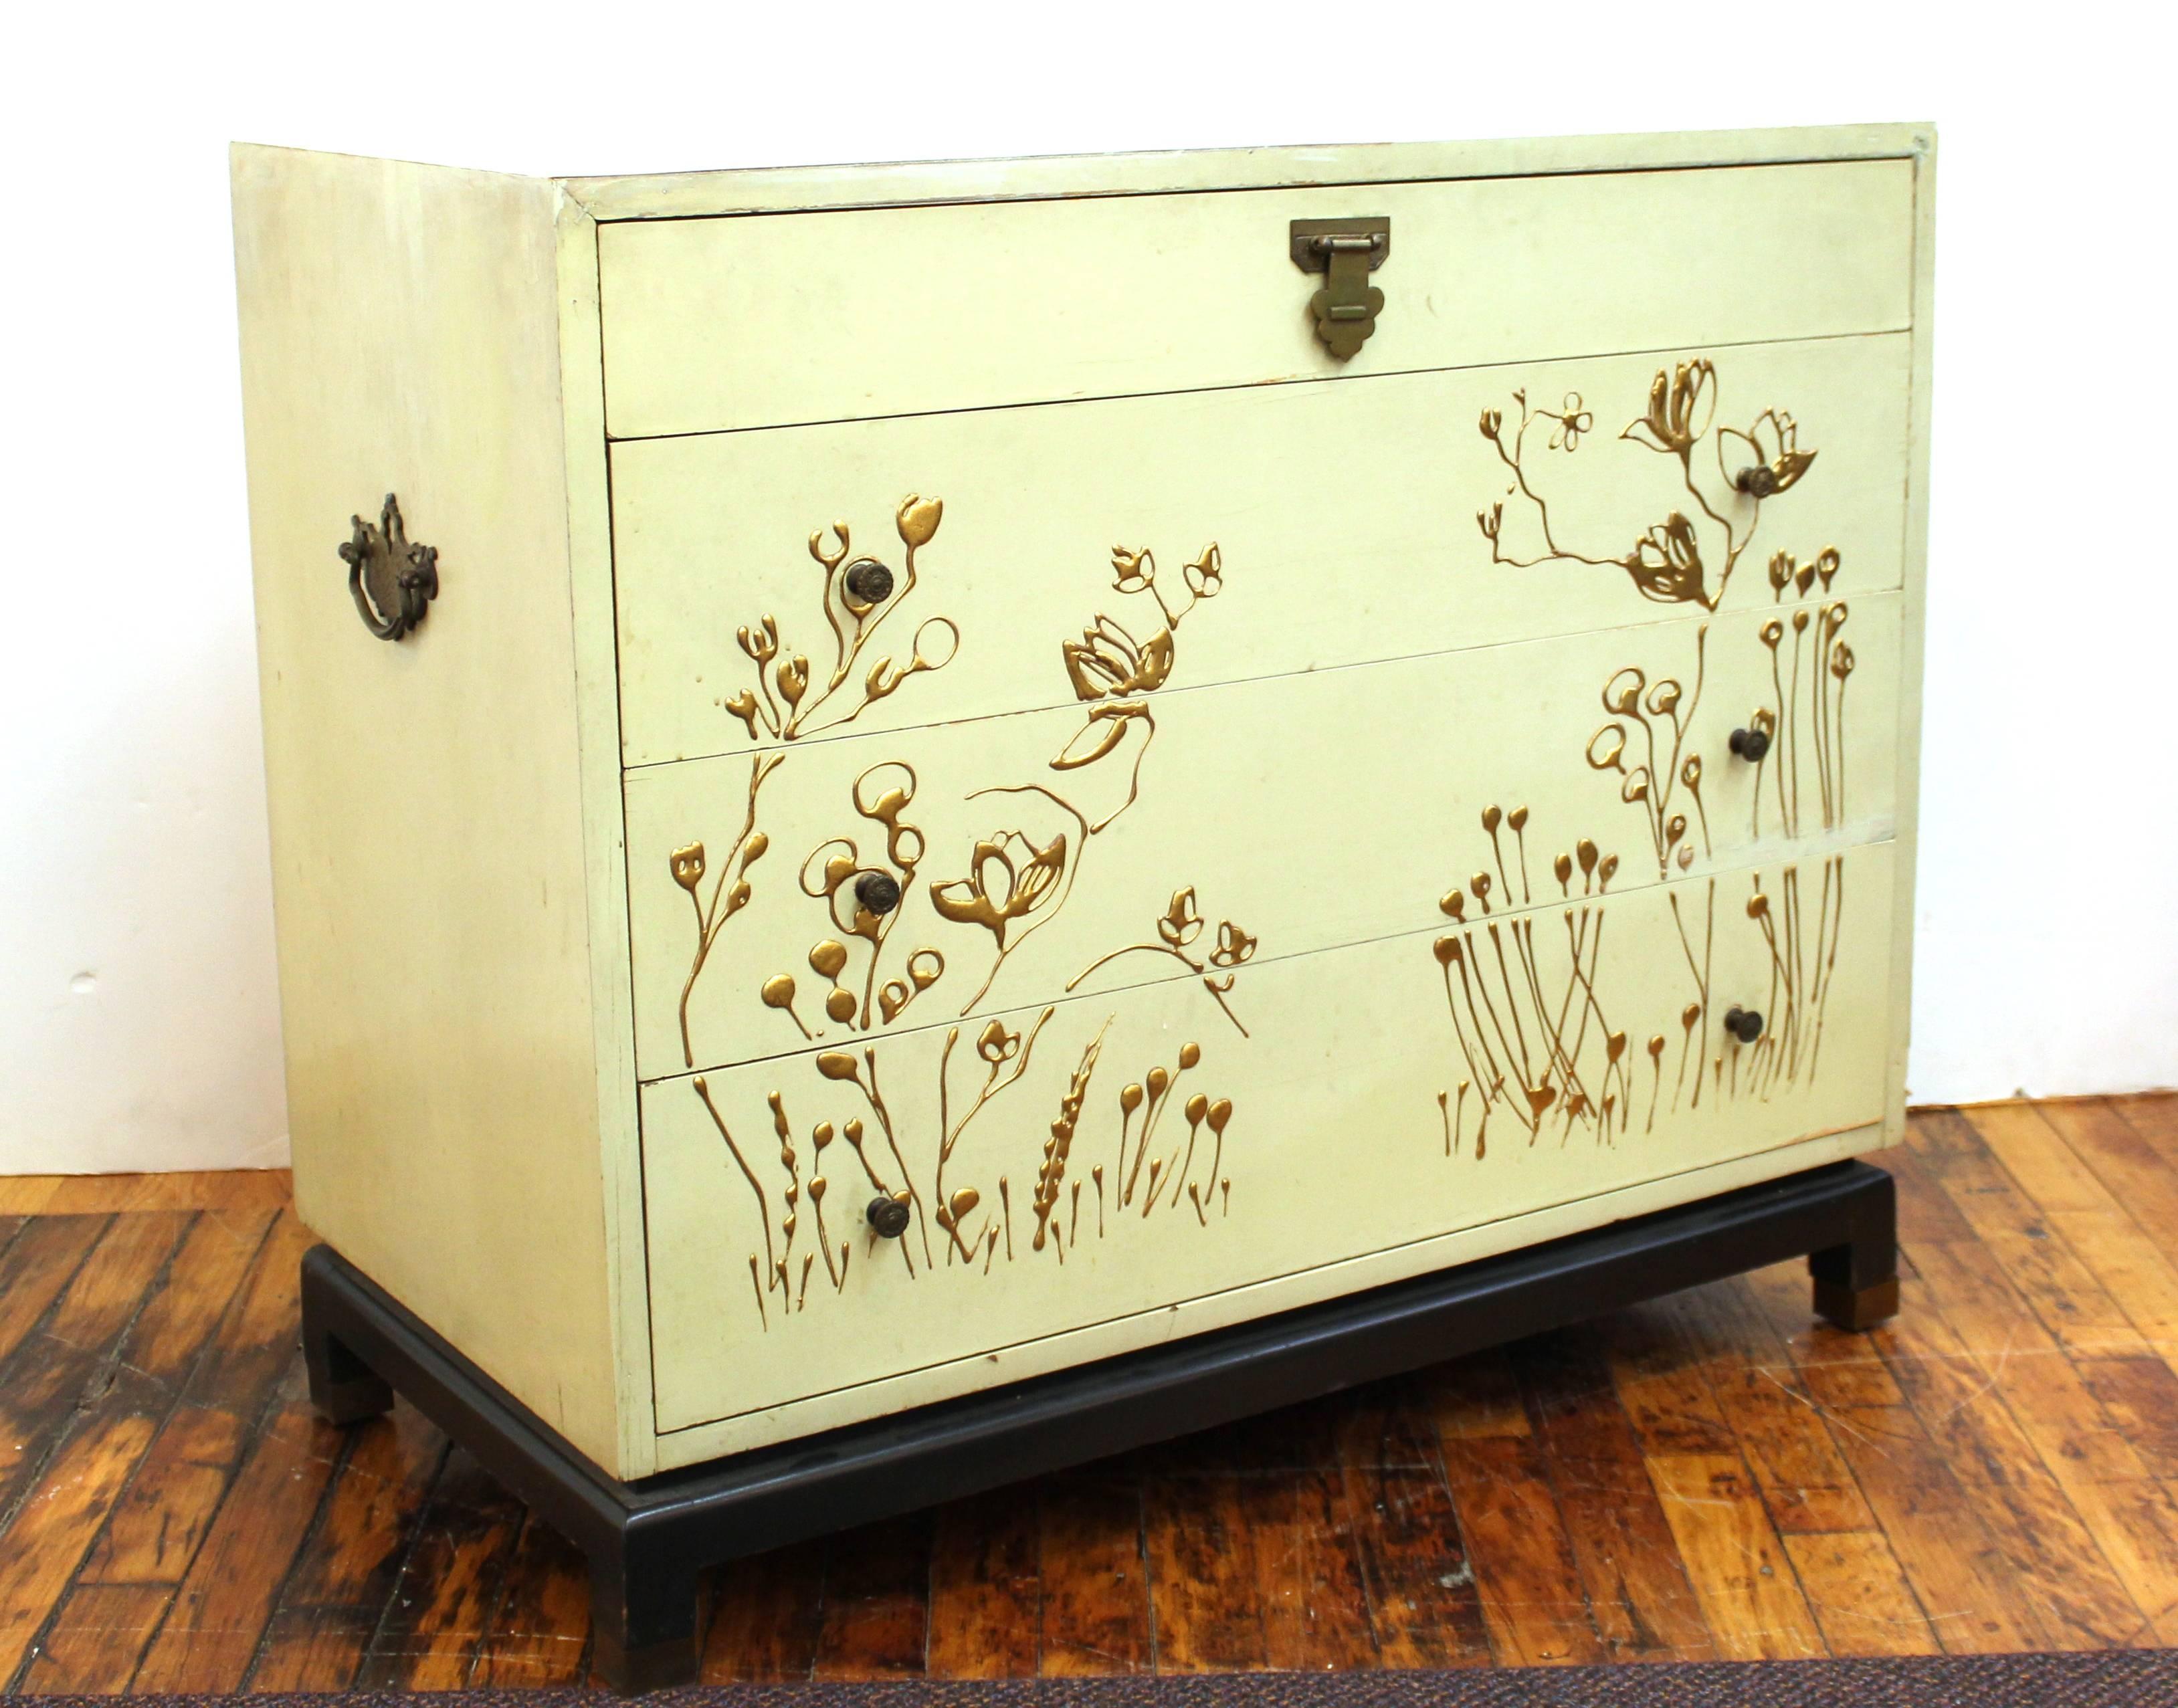 Asian style commode or chest with cream finish and decorative patinated brass hardware. Decorated with flowering plants hand painted in gold tone paint. The piece stands on a black base on block feet. Stamped on the back with description and serial